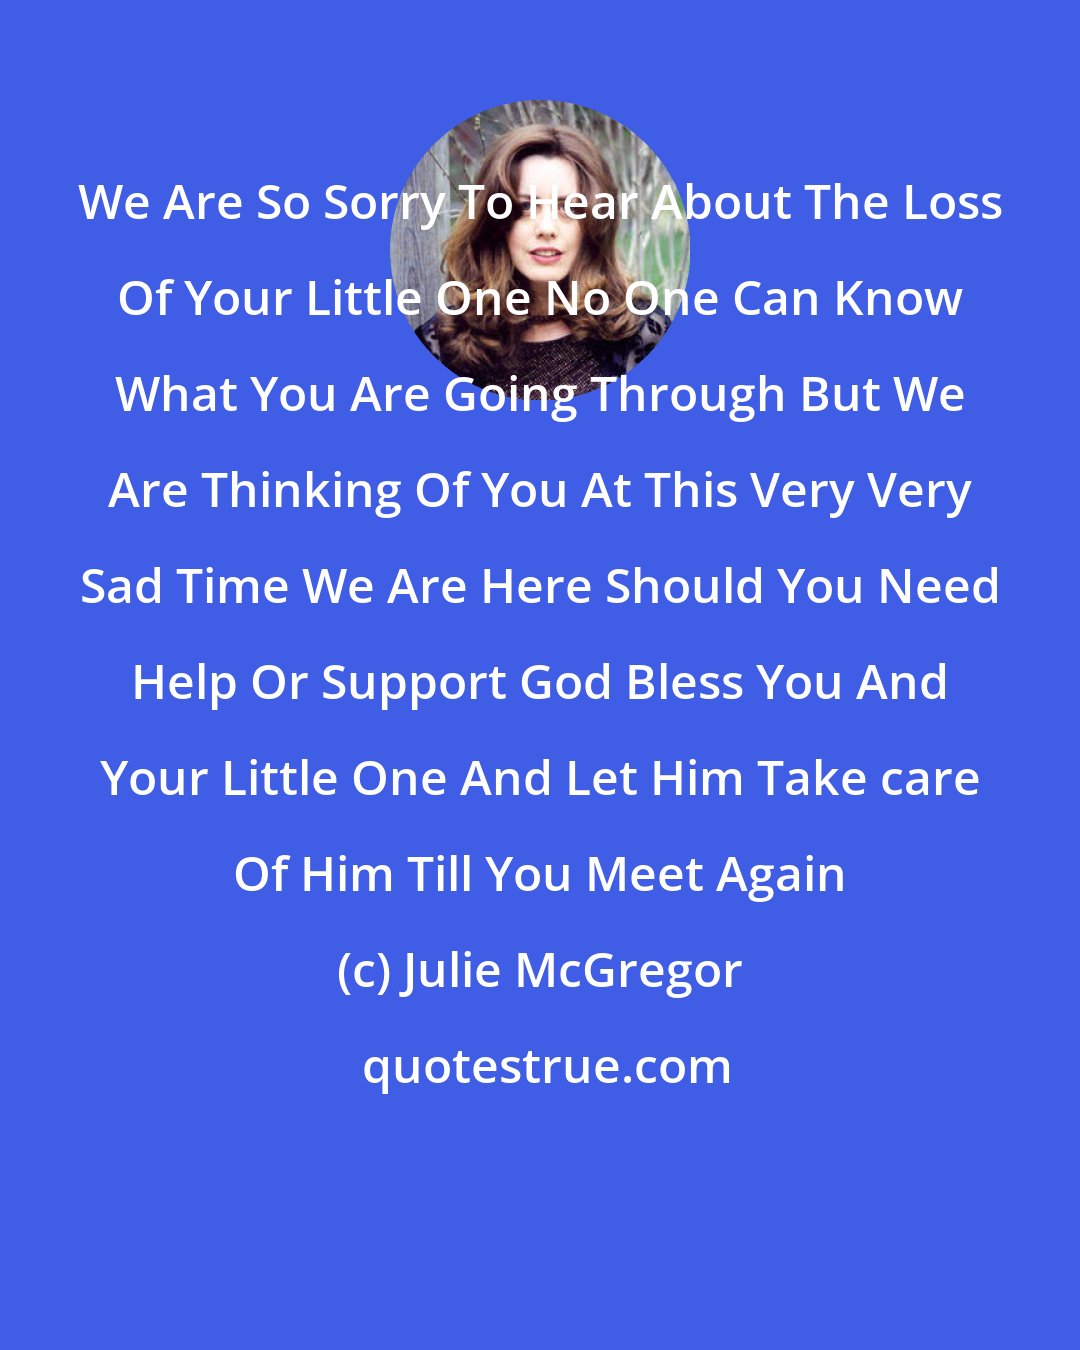 Julie McGregor: We Are So Sorry To Hear About The Loss Of Your Little One No One Can Know What You Are Going Through But We Are Thinking Of You At This Very Very Sad Time We Are Here Should You Need Help Or Support God Bless You And Your Little One And Let Him Take care Of Him Till You Meet Again